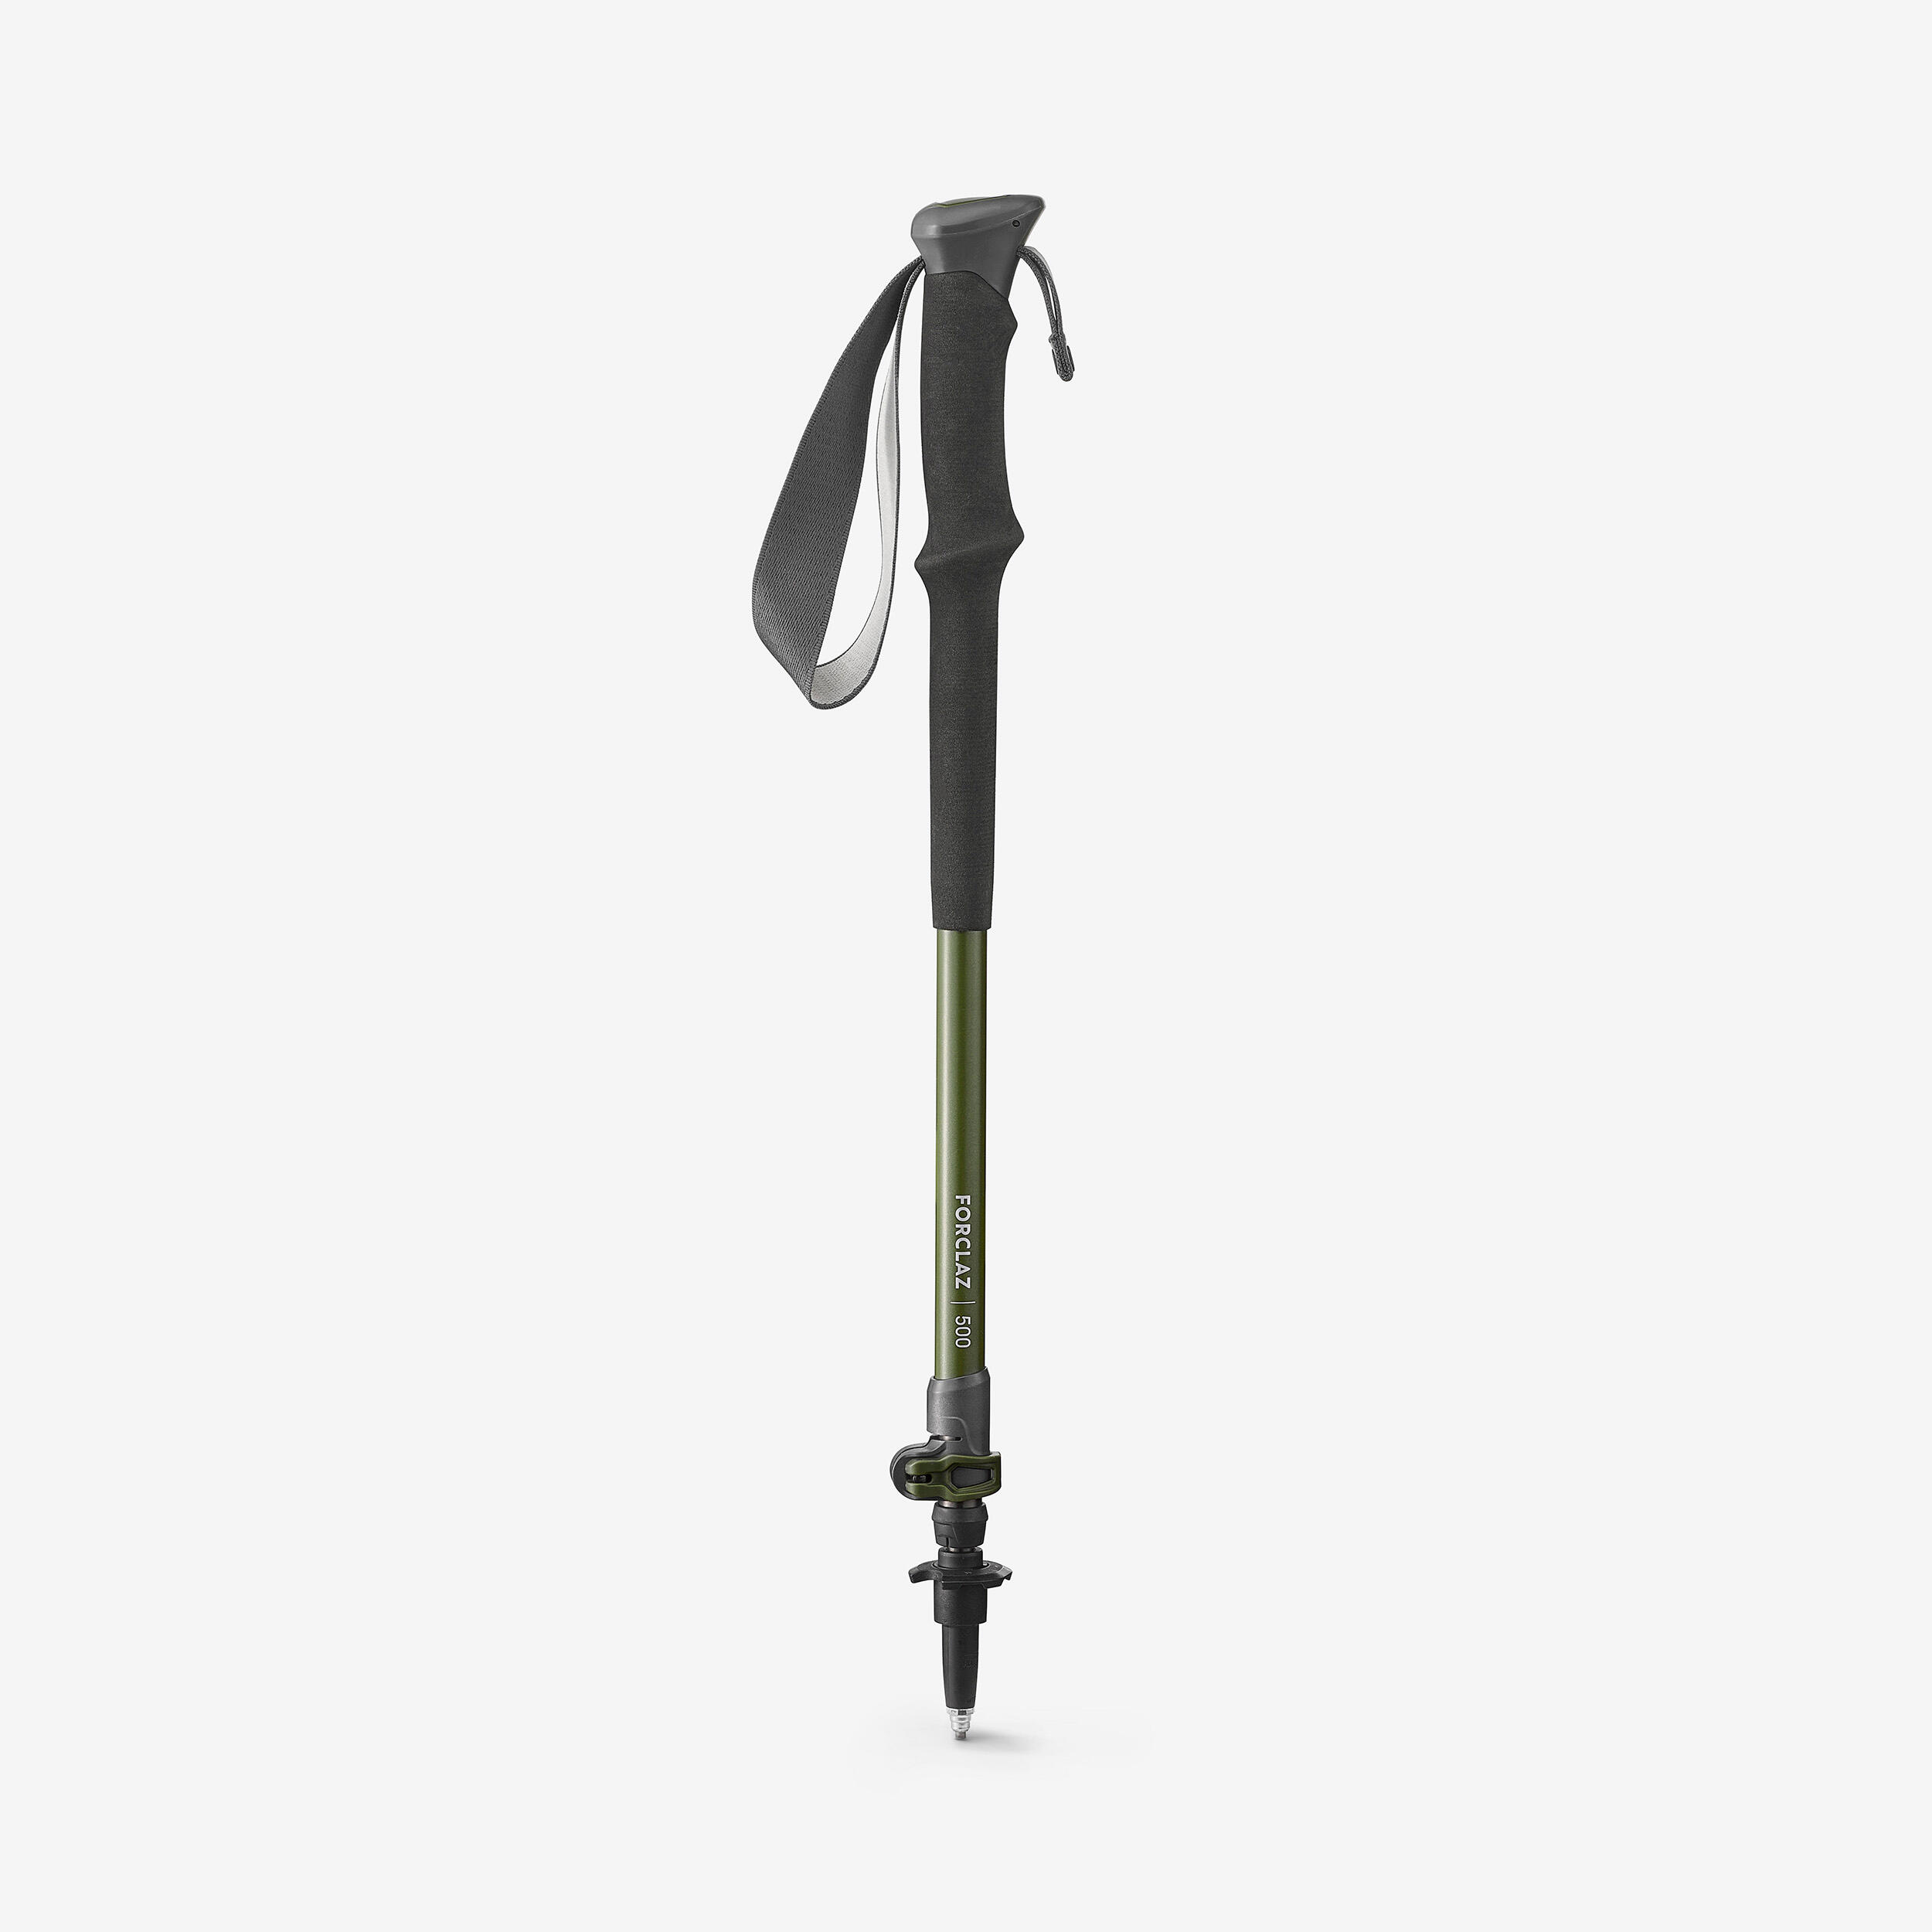 https://contents.mediadecathlon.com/p2675321/k$0d136bfe092b54afcd3015ffc83f63a2/1-hiking-pole-with-quick-and-precise-adjustment-mt500-green-forclaz-8492573.jpg